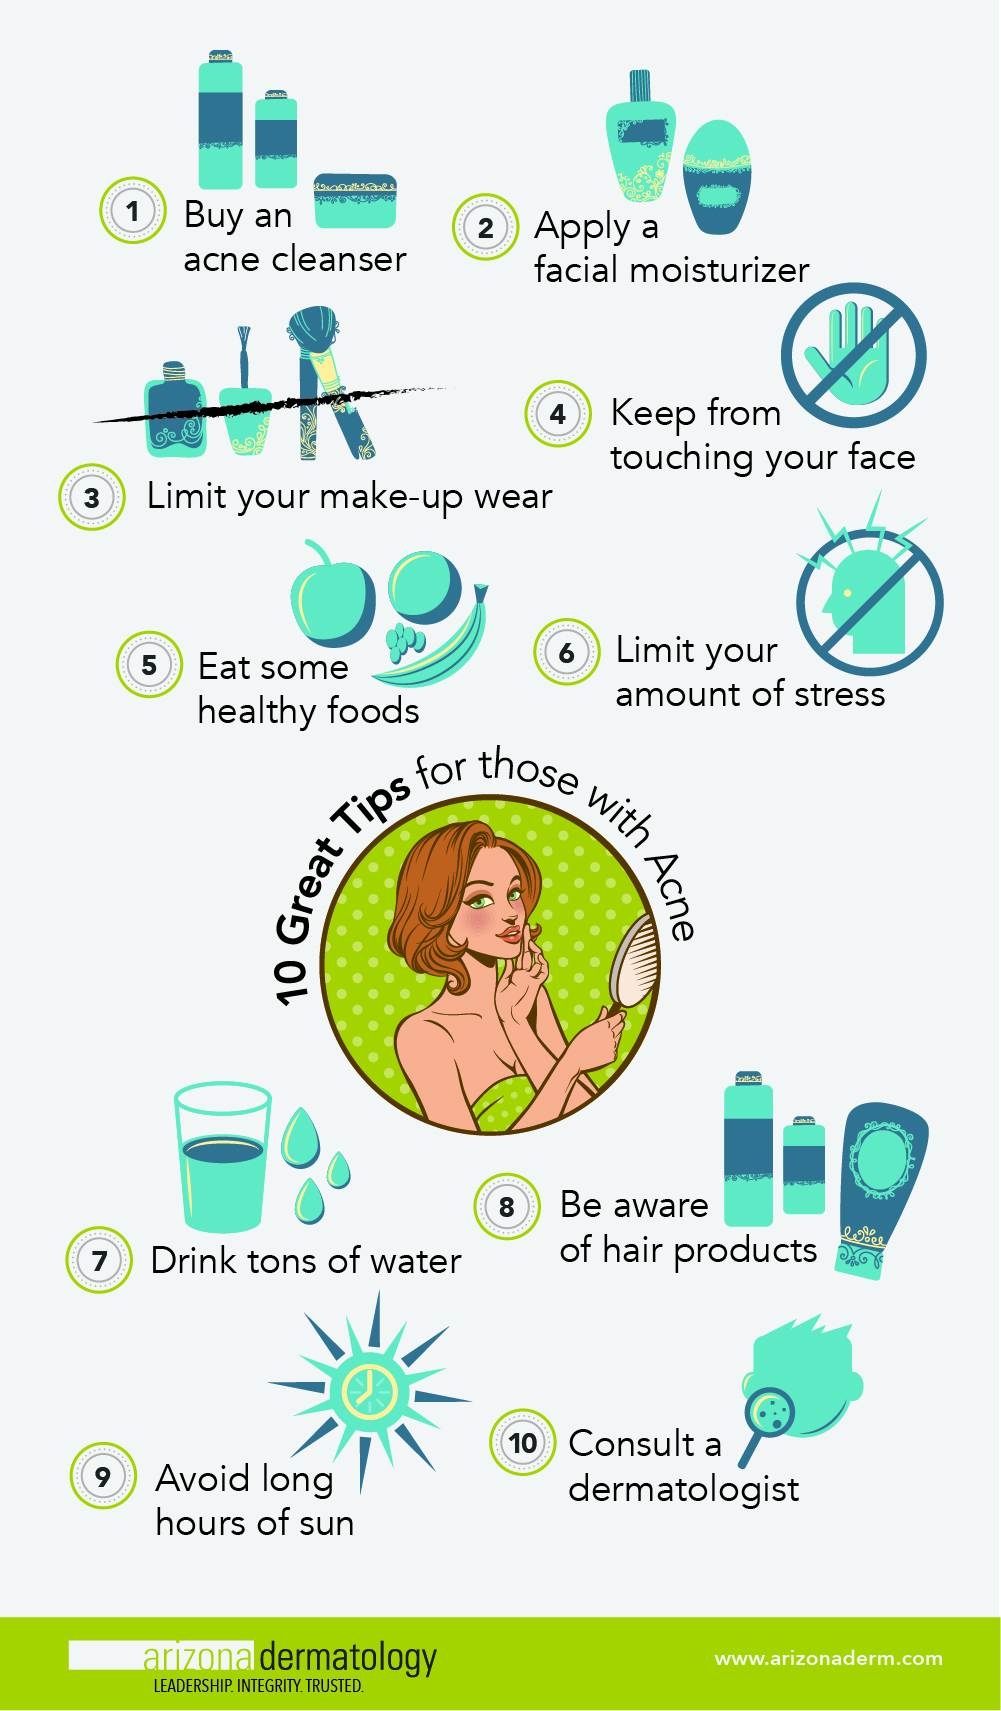 10 Tips for Those with Acne